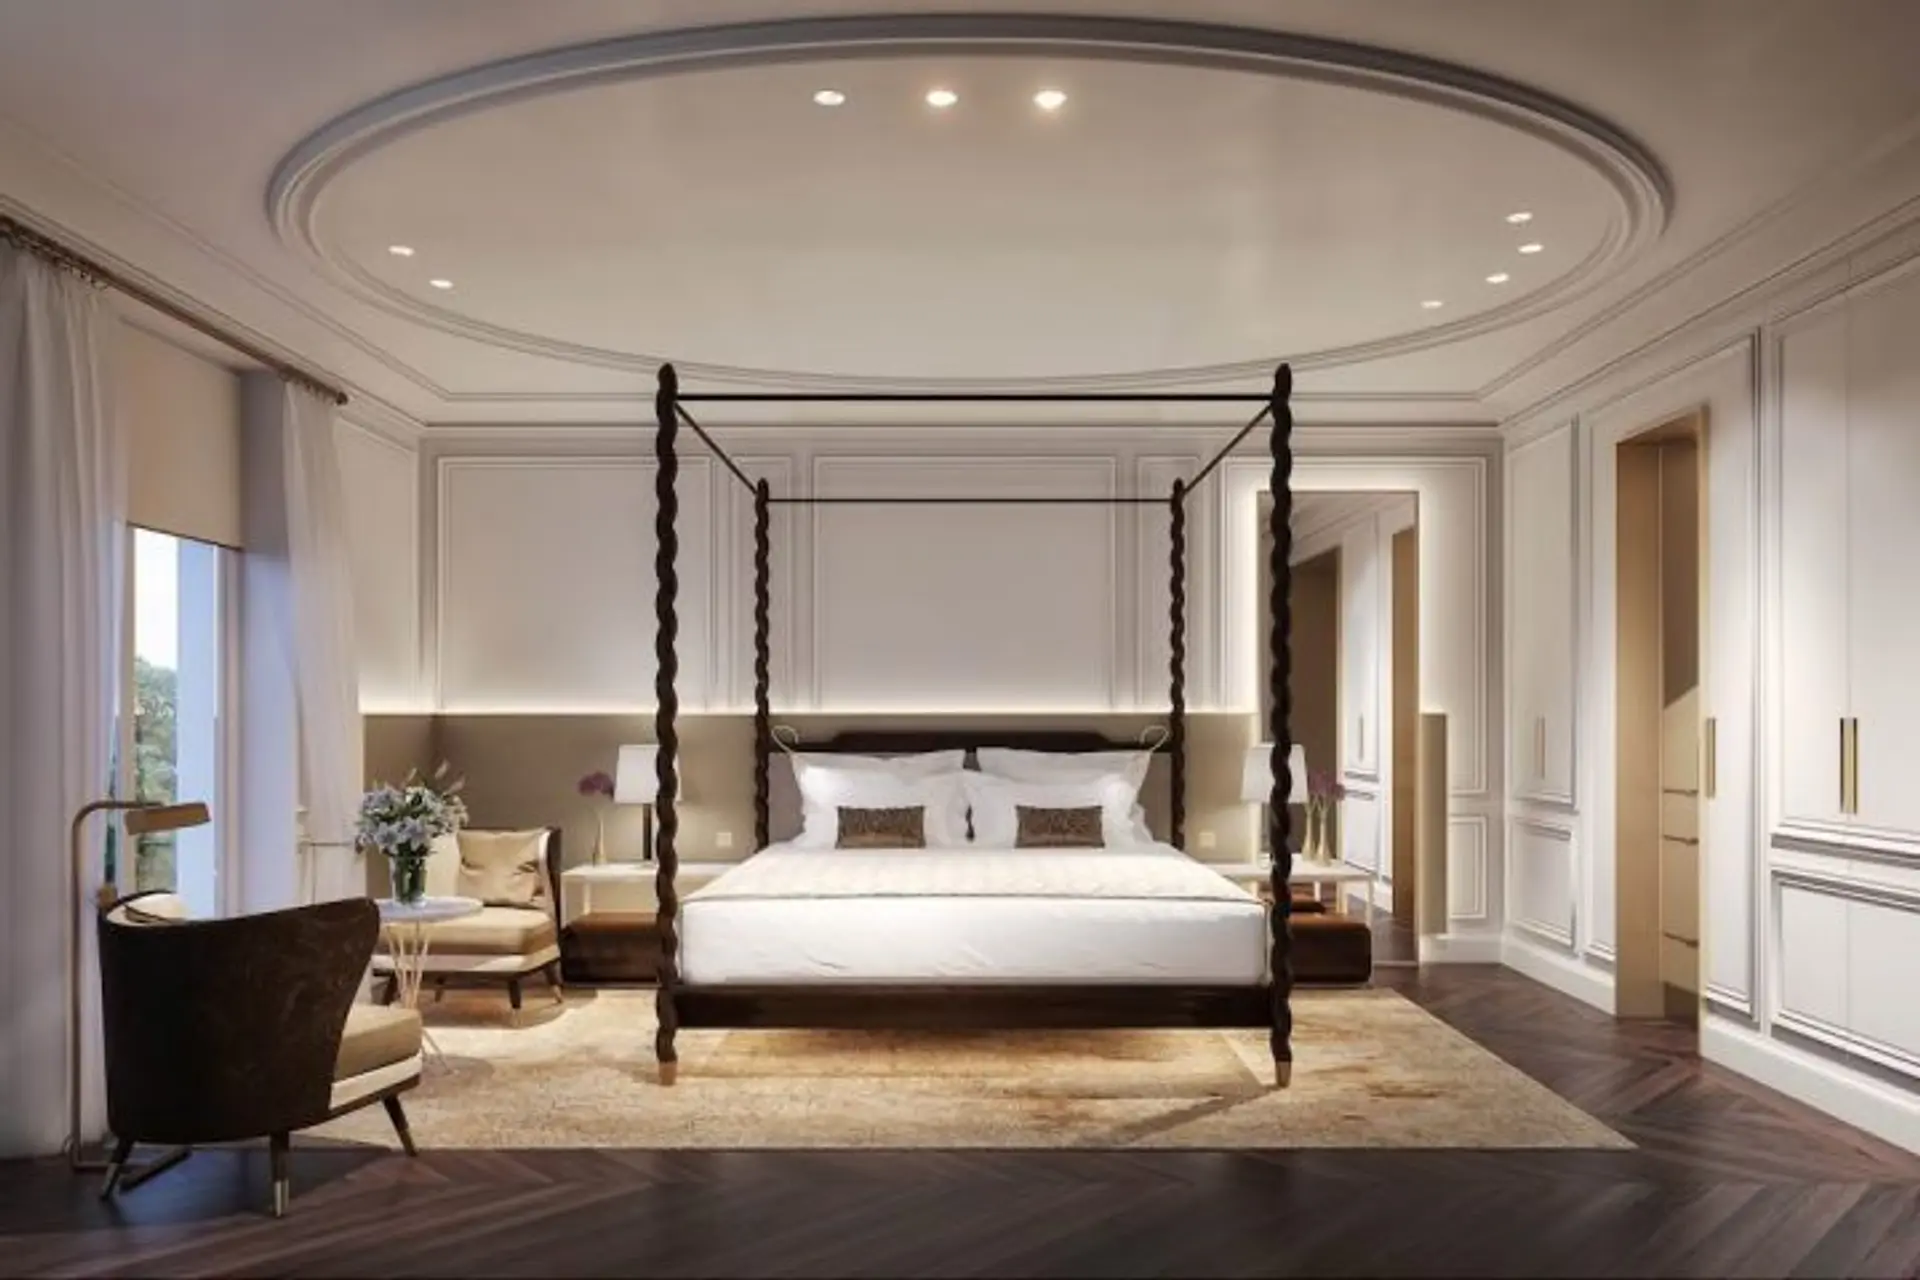 Hotels Articles - A timeless and iconic hotel in Madrid